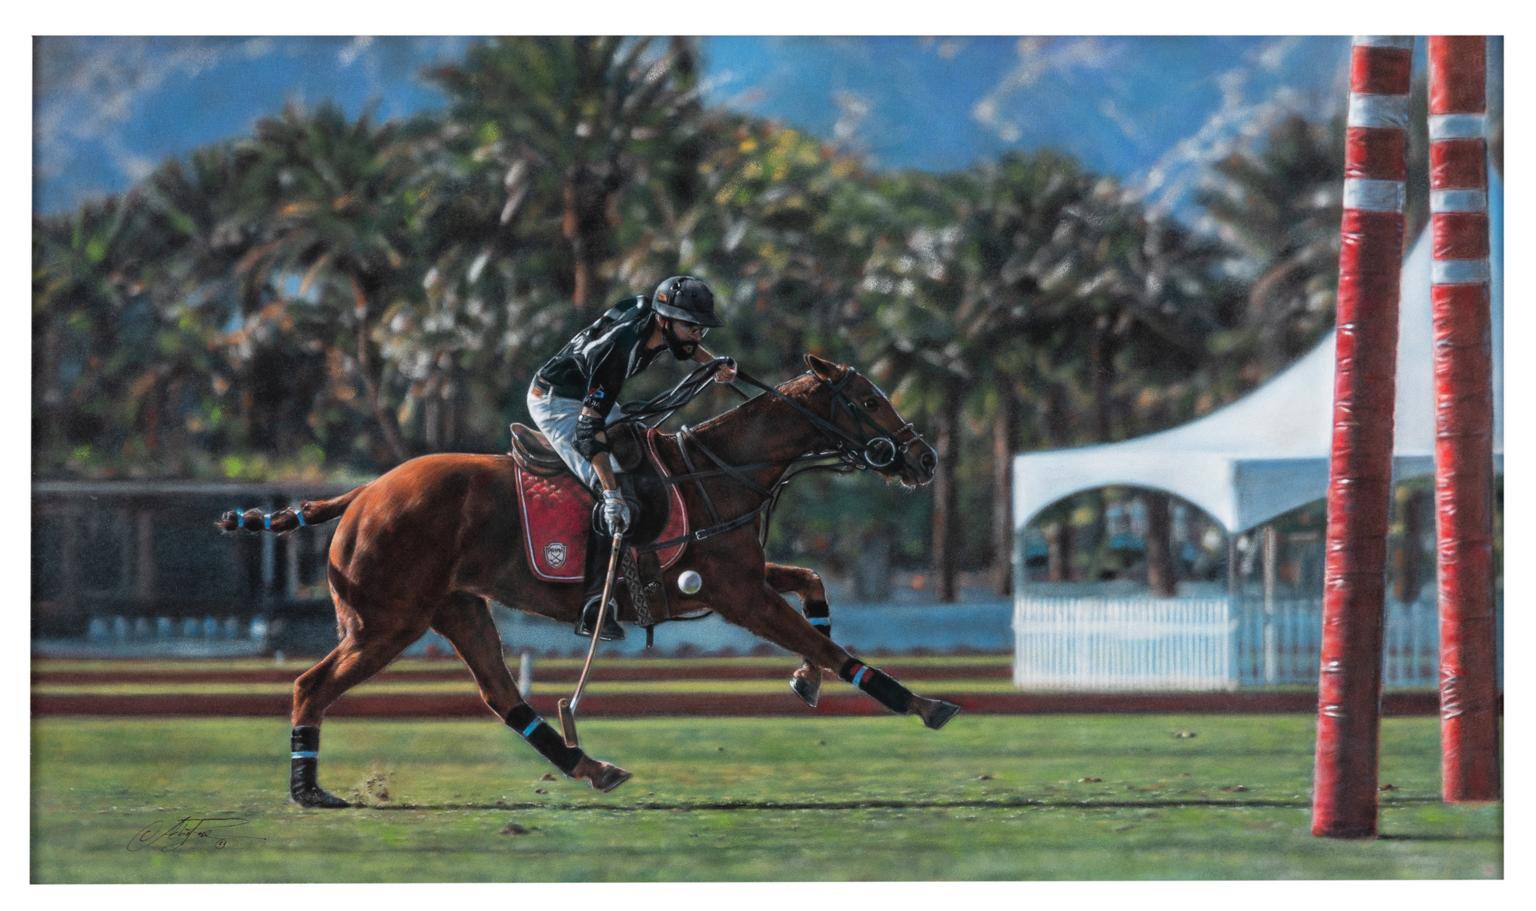 For The Win - Polo Pony Pastel Painting Equine Photorealism 